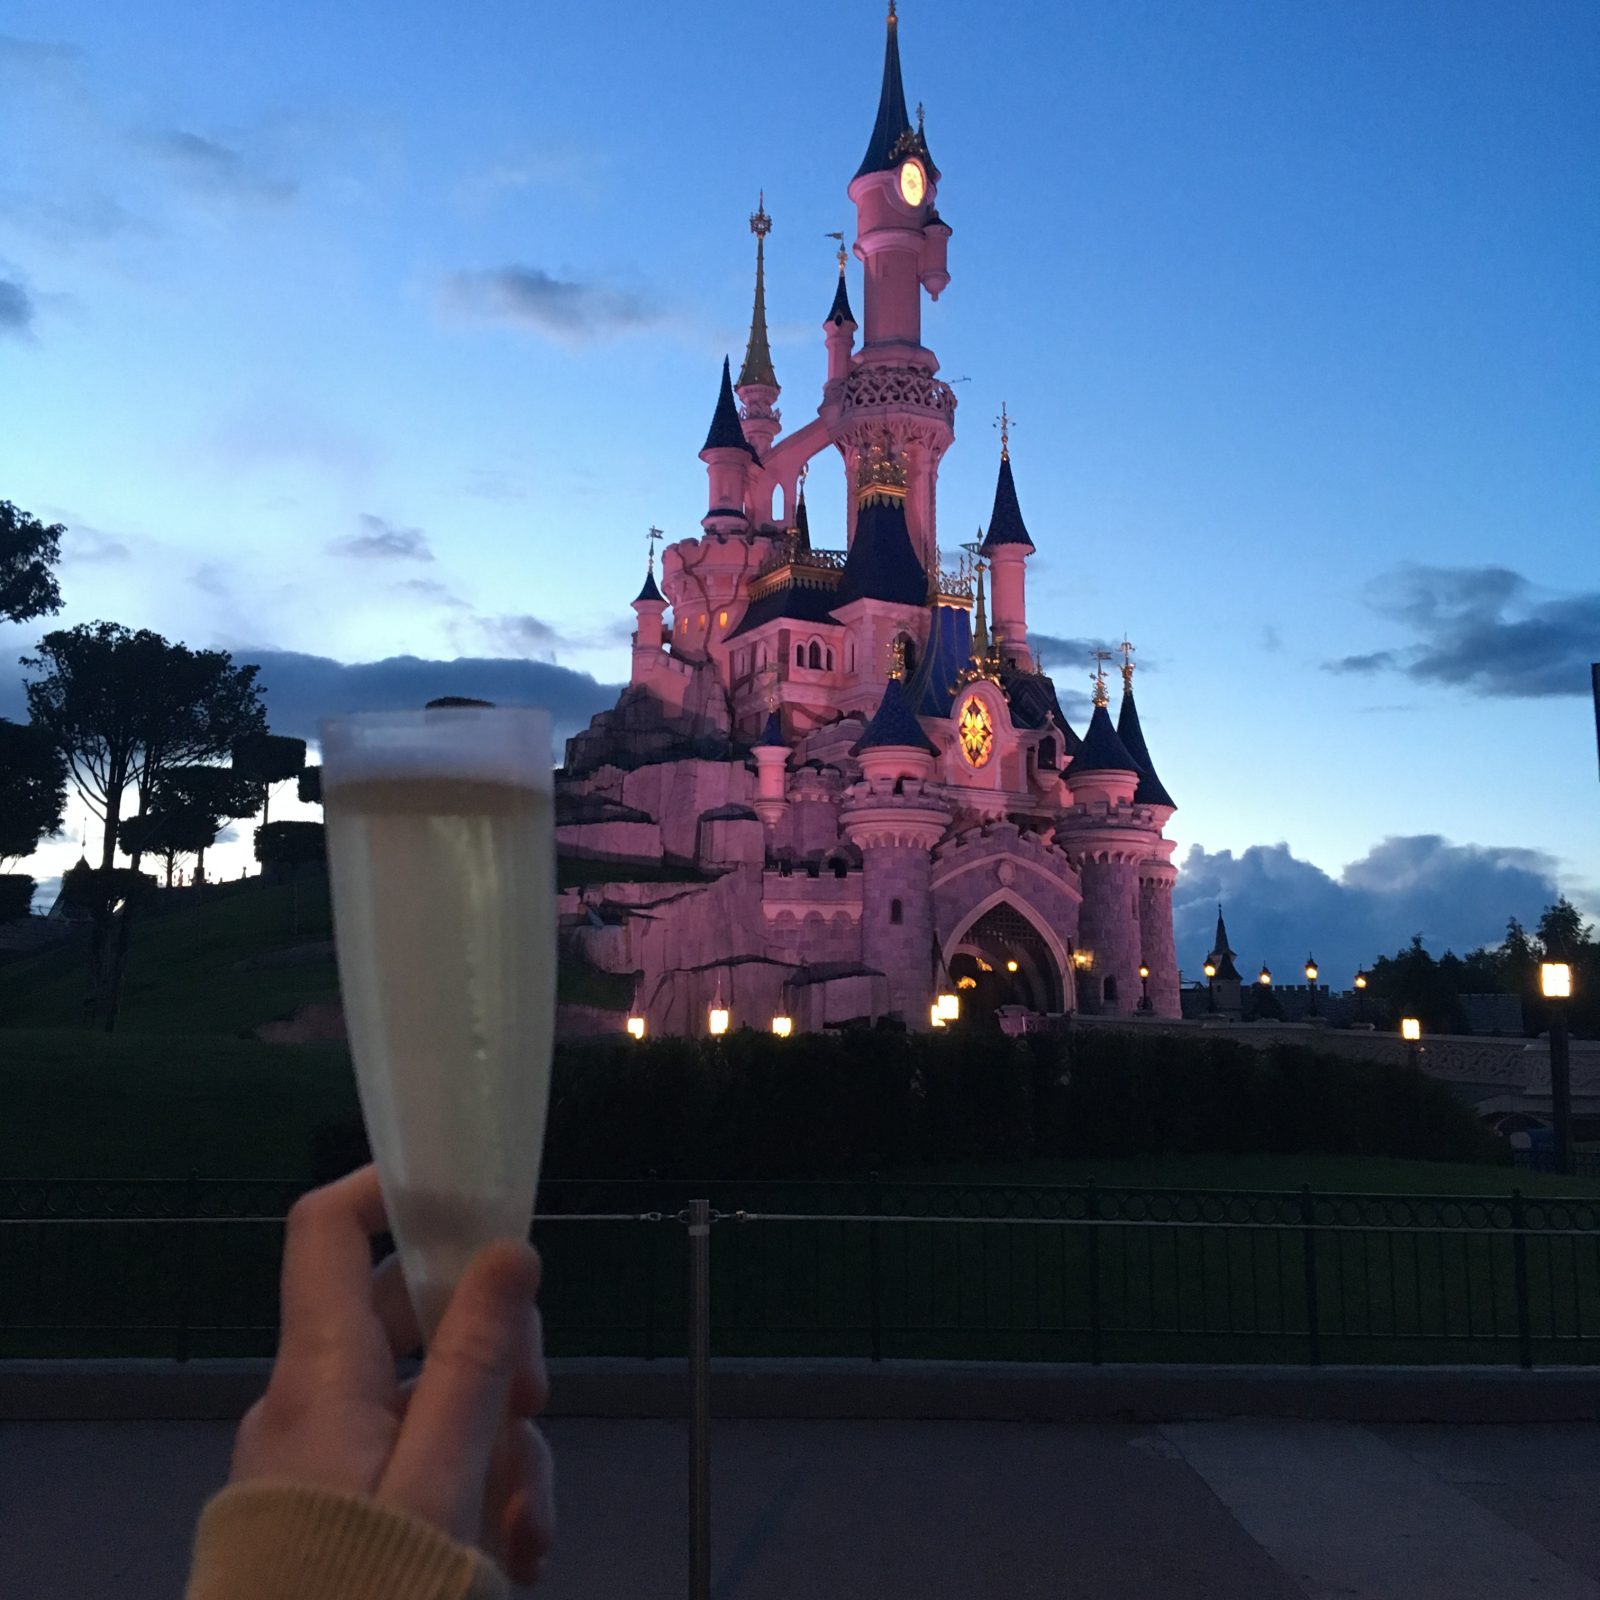 hand holding champagne glass in front of lit up disneyland castle